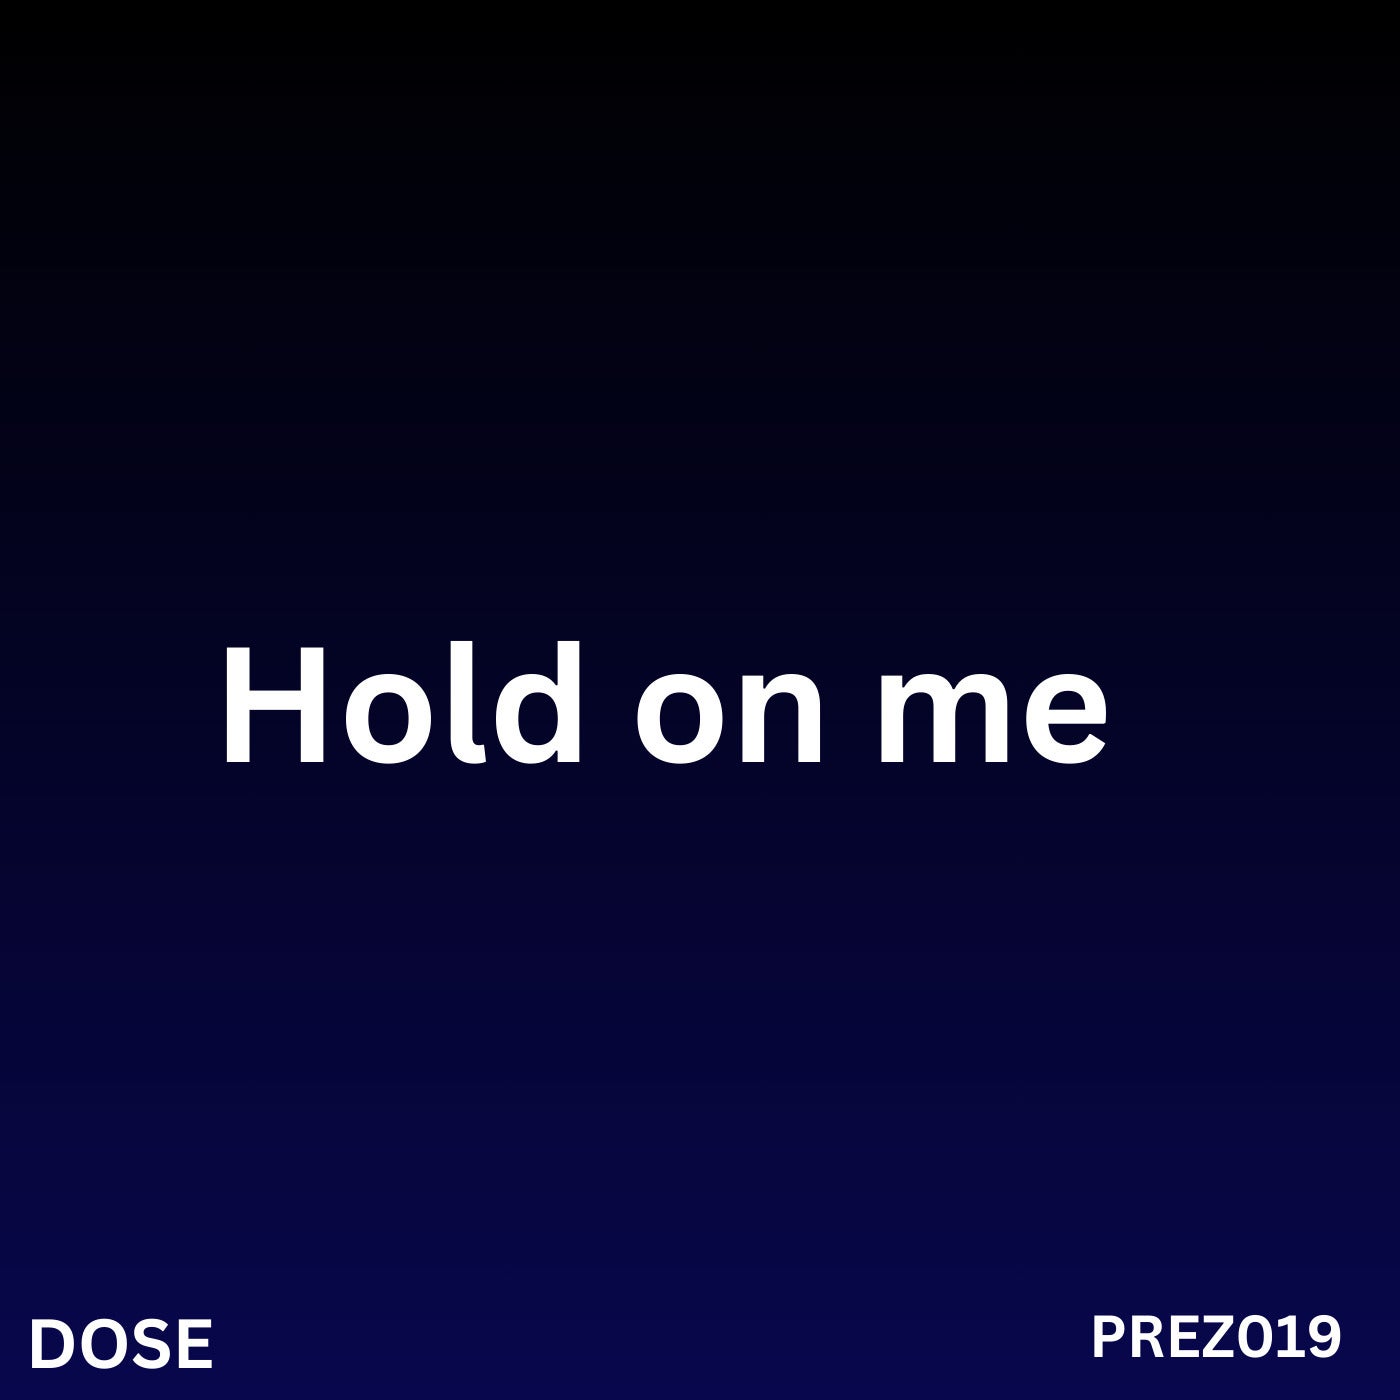 Hold On Me